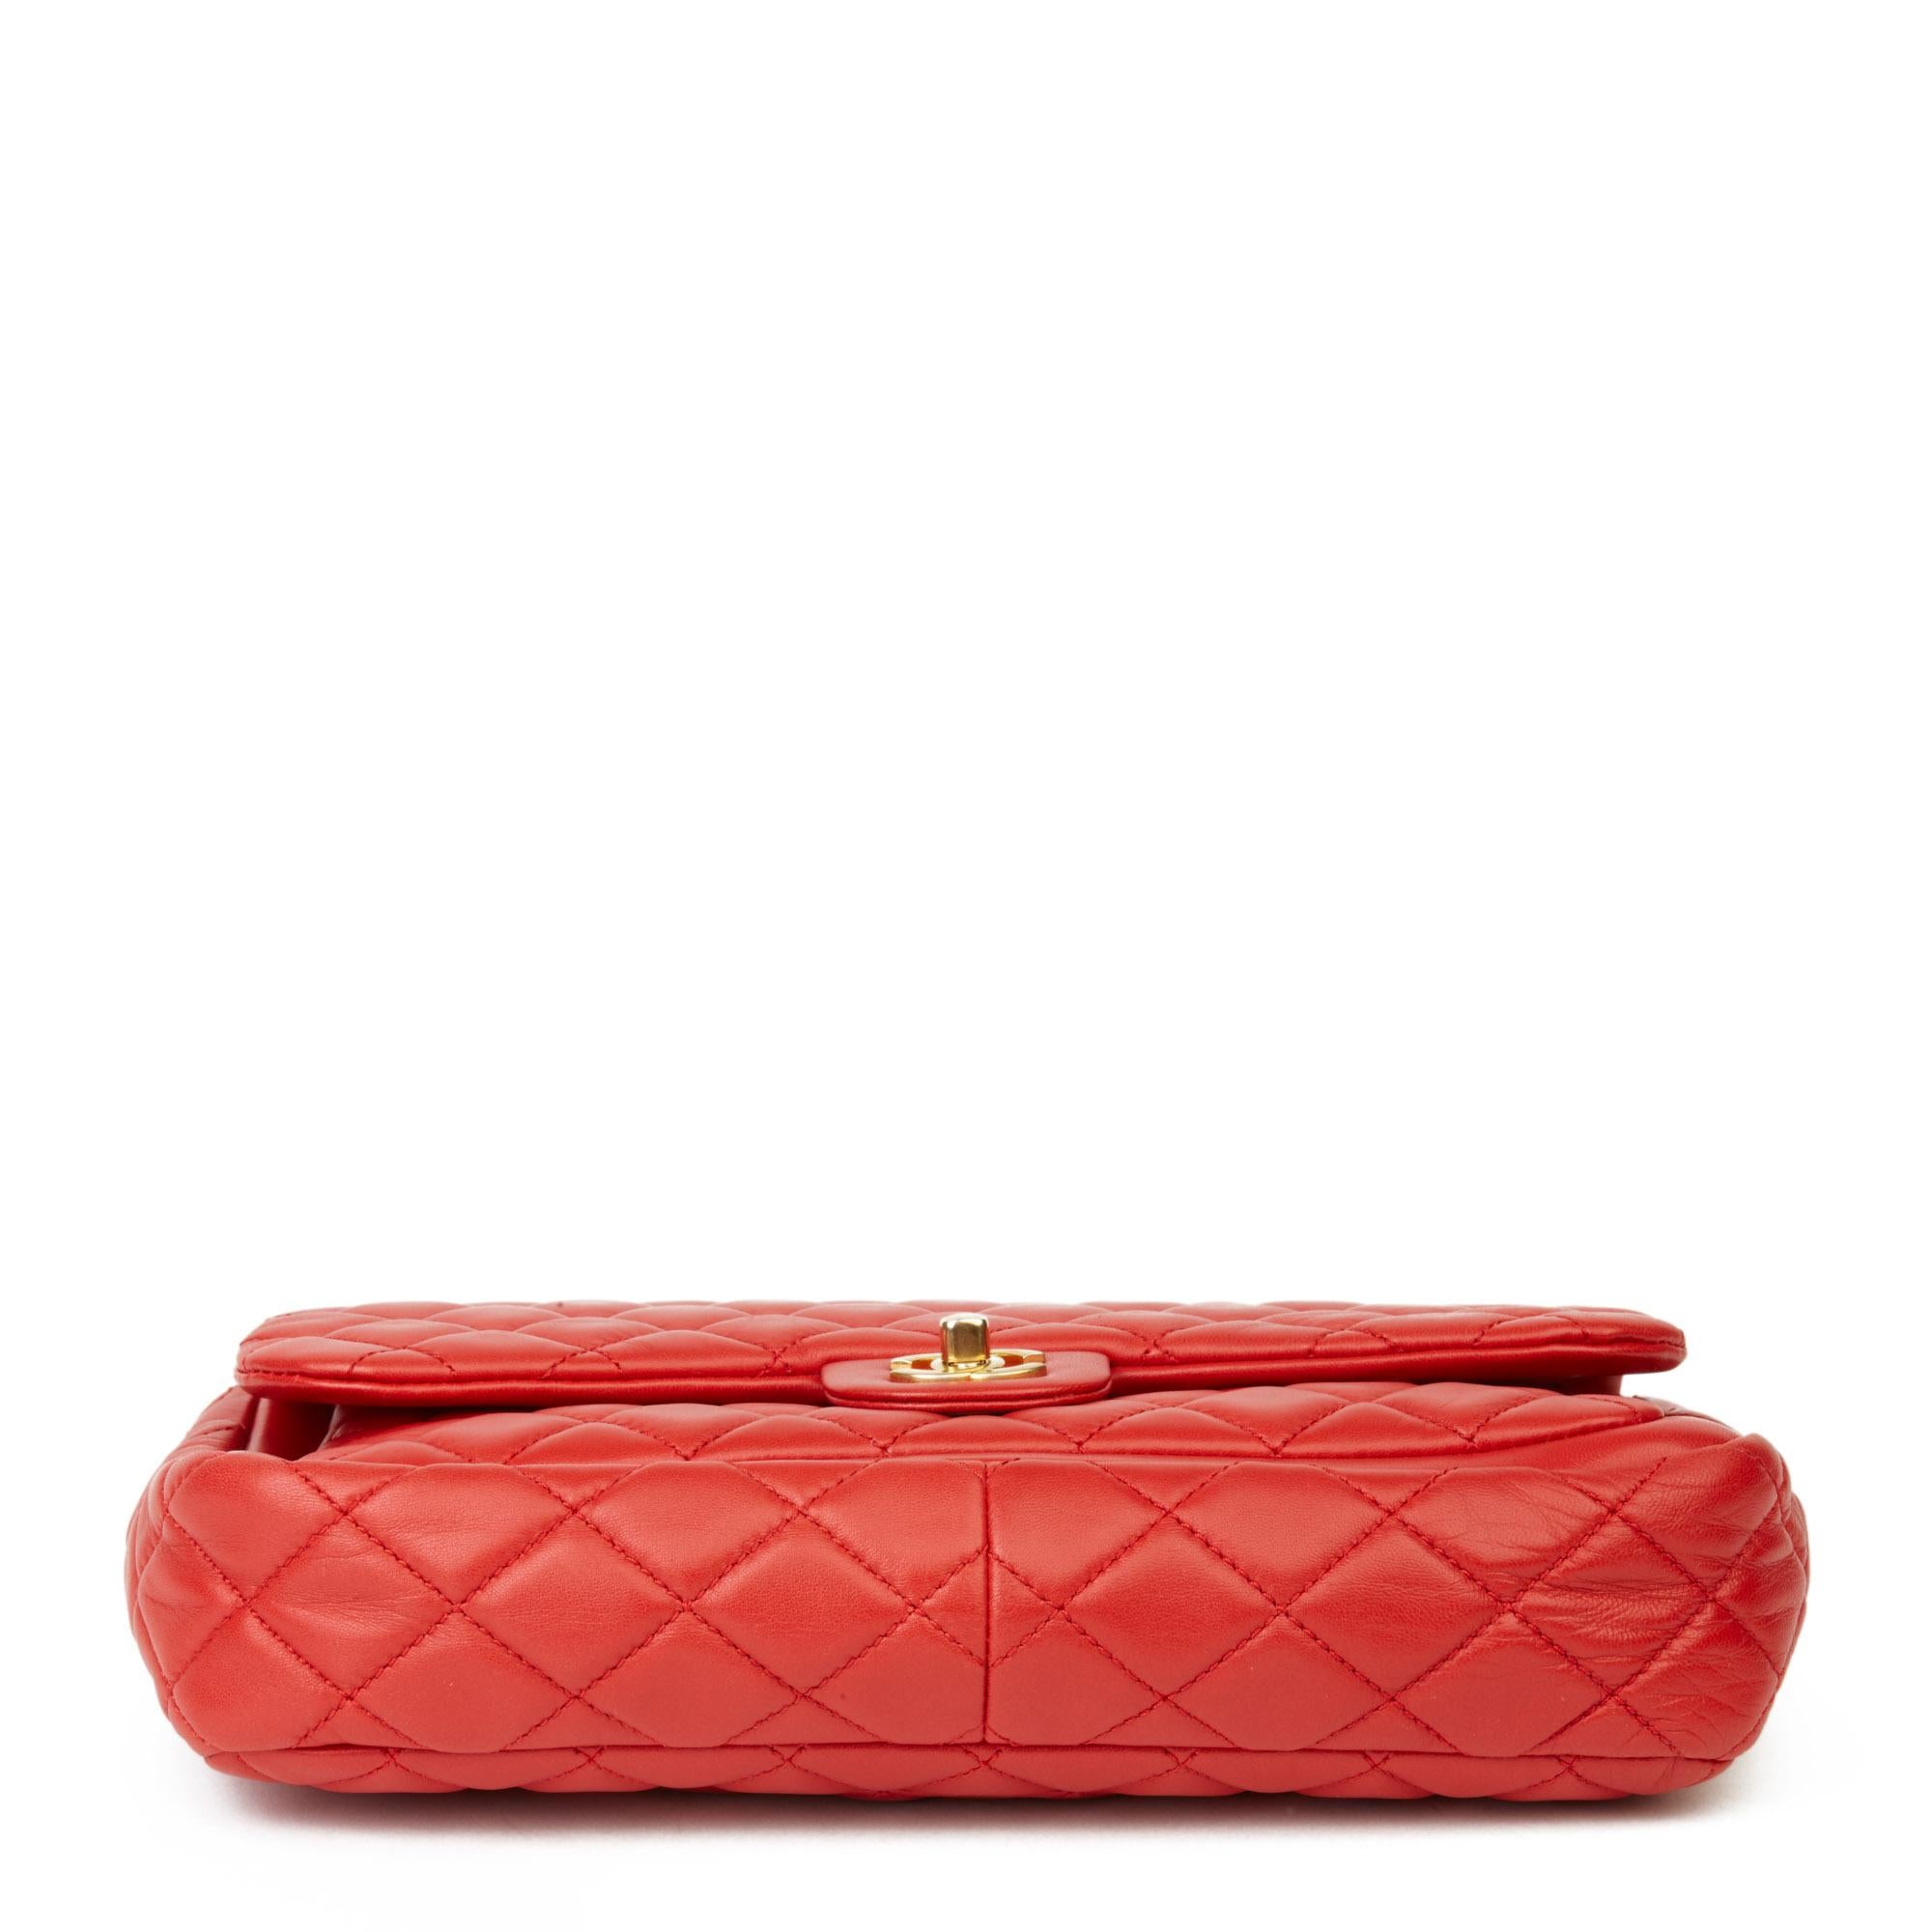 2014 Chanel Lipstick Red Quilted Lambskin Classic Single Flap Bag 1